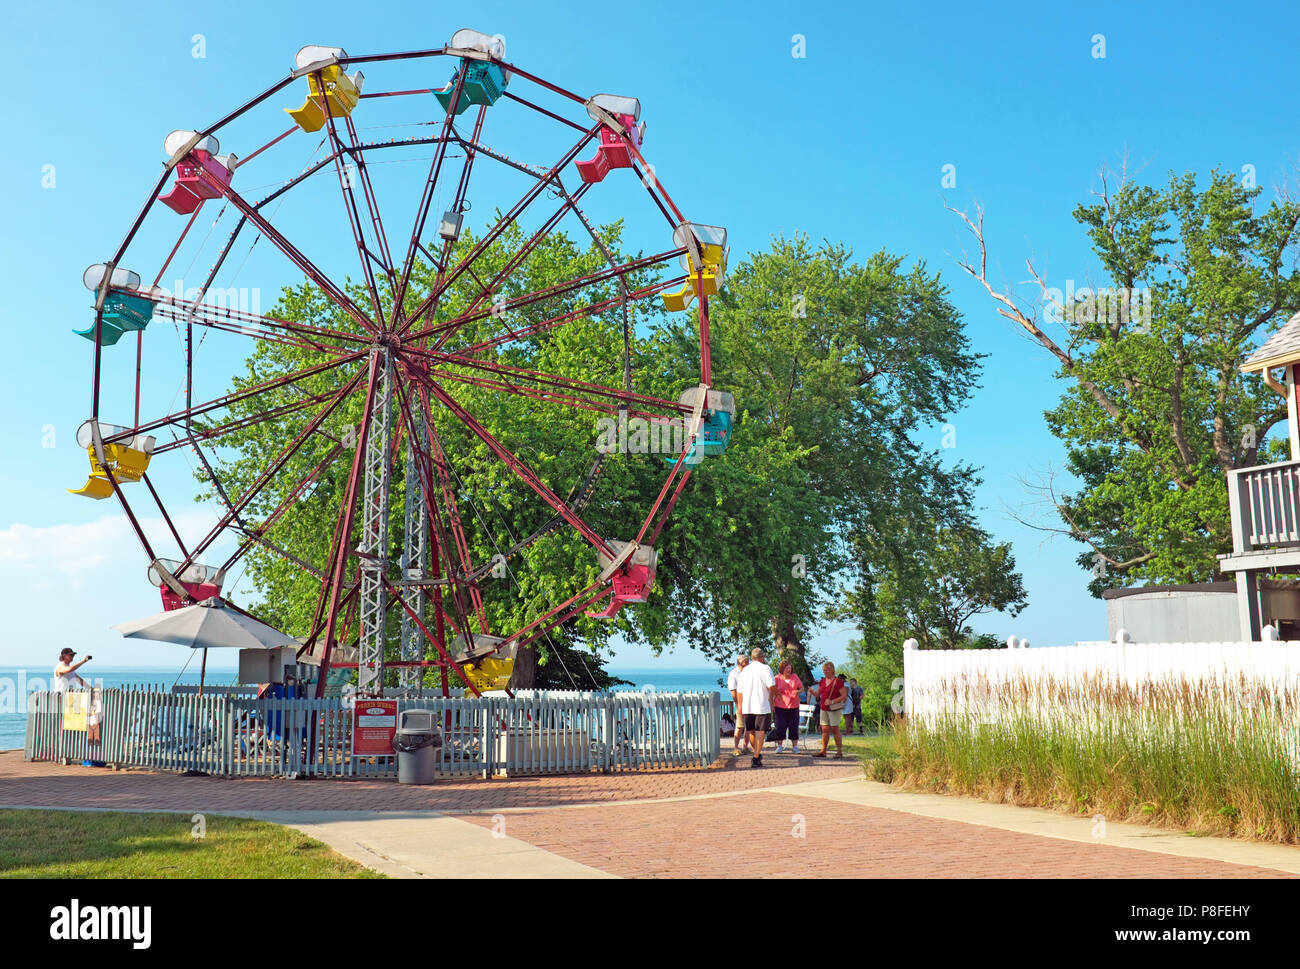 The Erieview Park Ferris Wheel, made in 1956, is an iconic historic amusement ride in the summer resort area of Northeast Ohio. Stock Photo